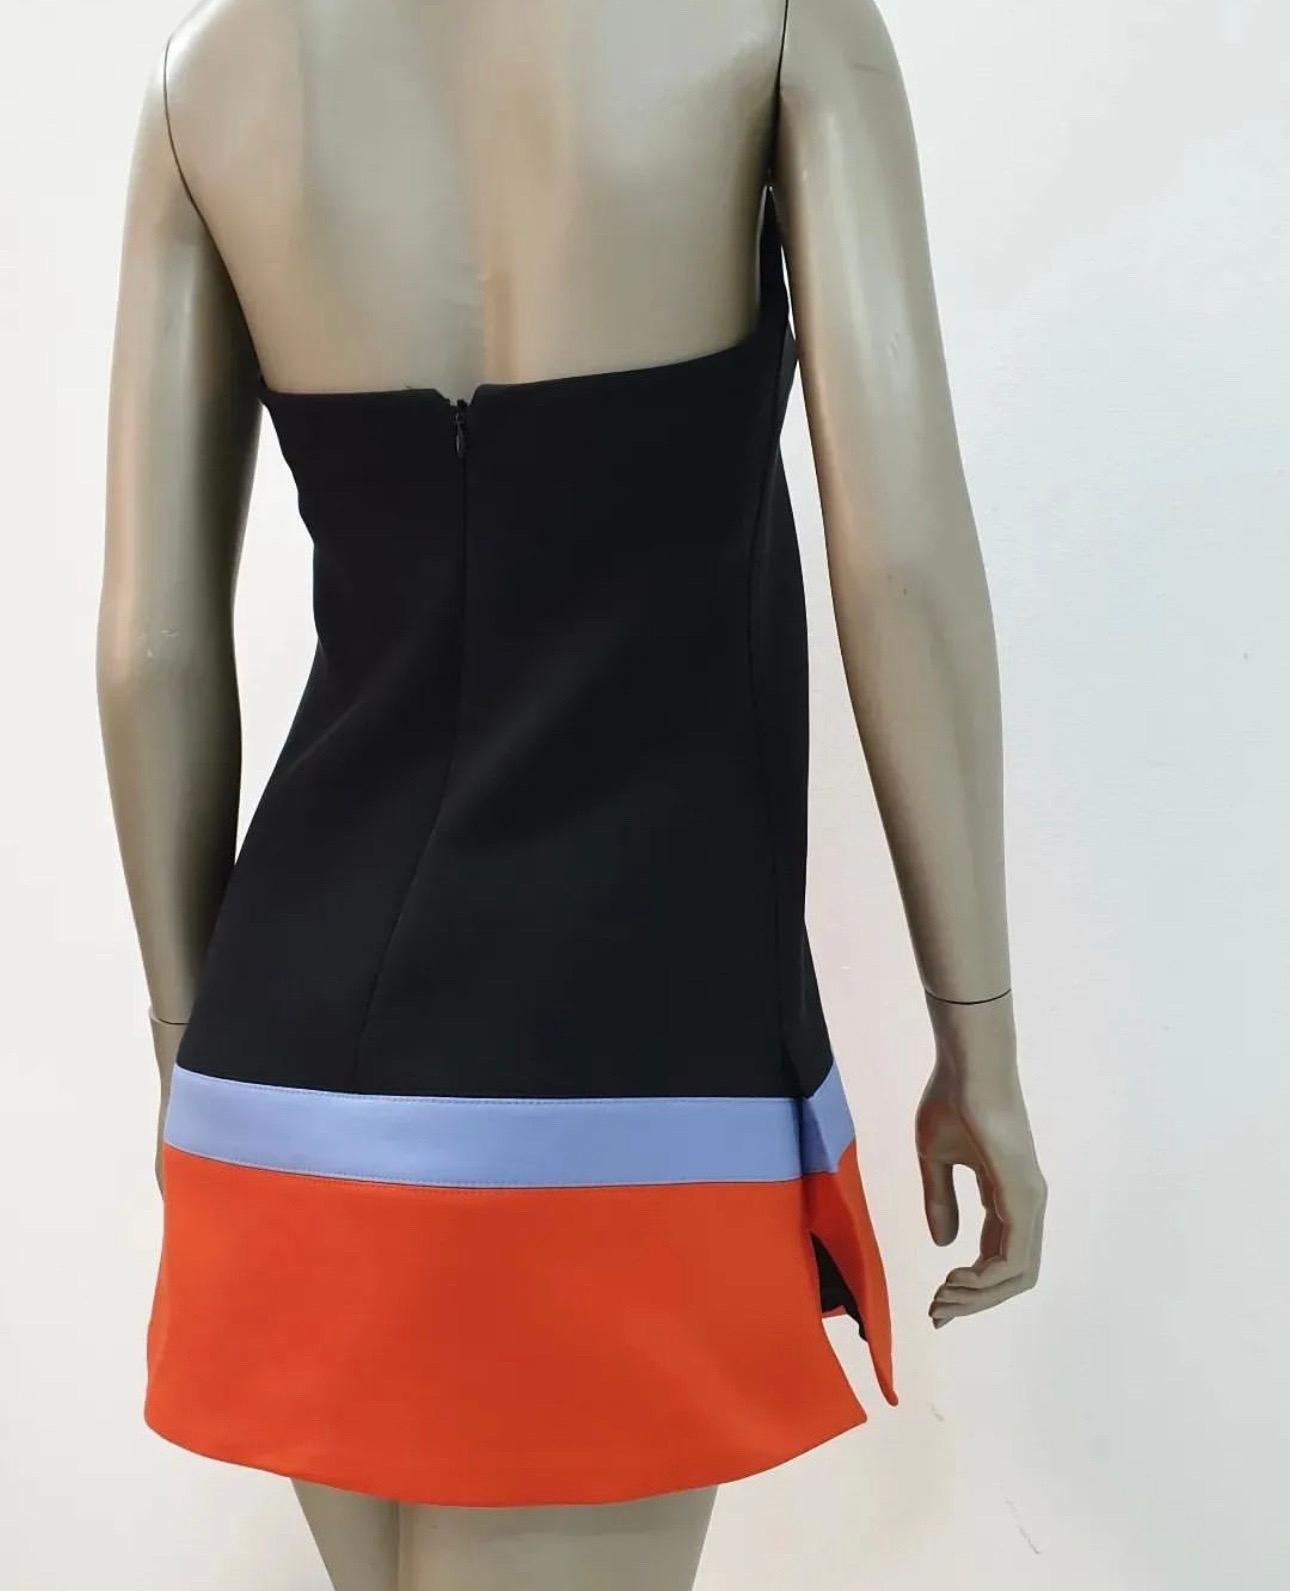 A-line from Christian Dior,
Crew Neck, Short, Plain, Stripes, Elegant Style, Casual Style, A-line, Sleeveless, 
2022 SS
Sz.34
Very good condition
